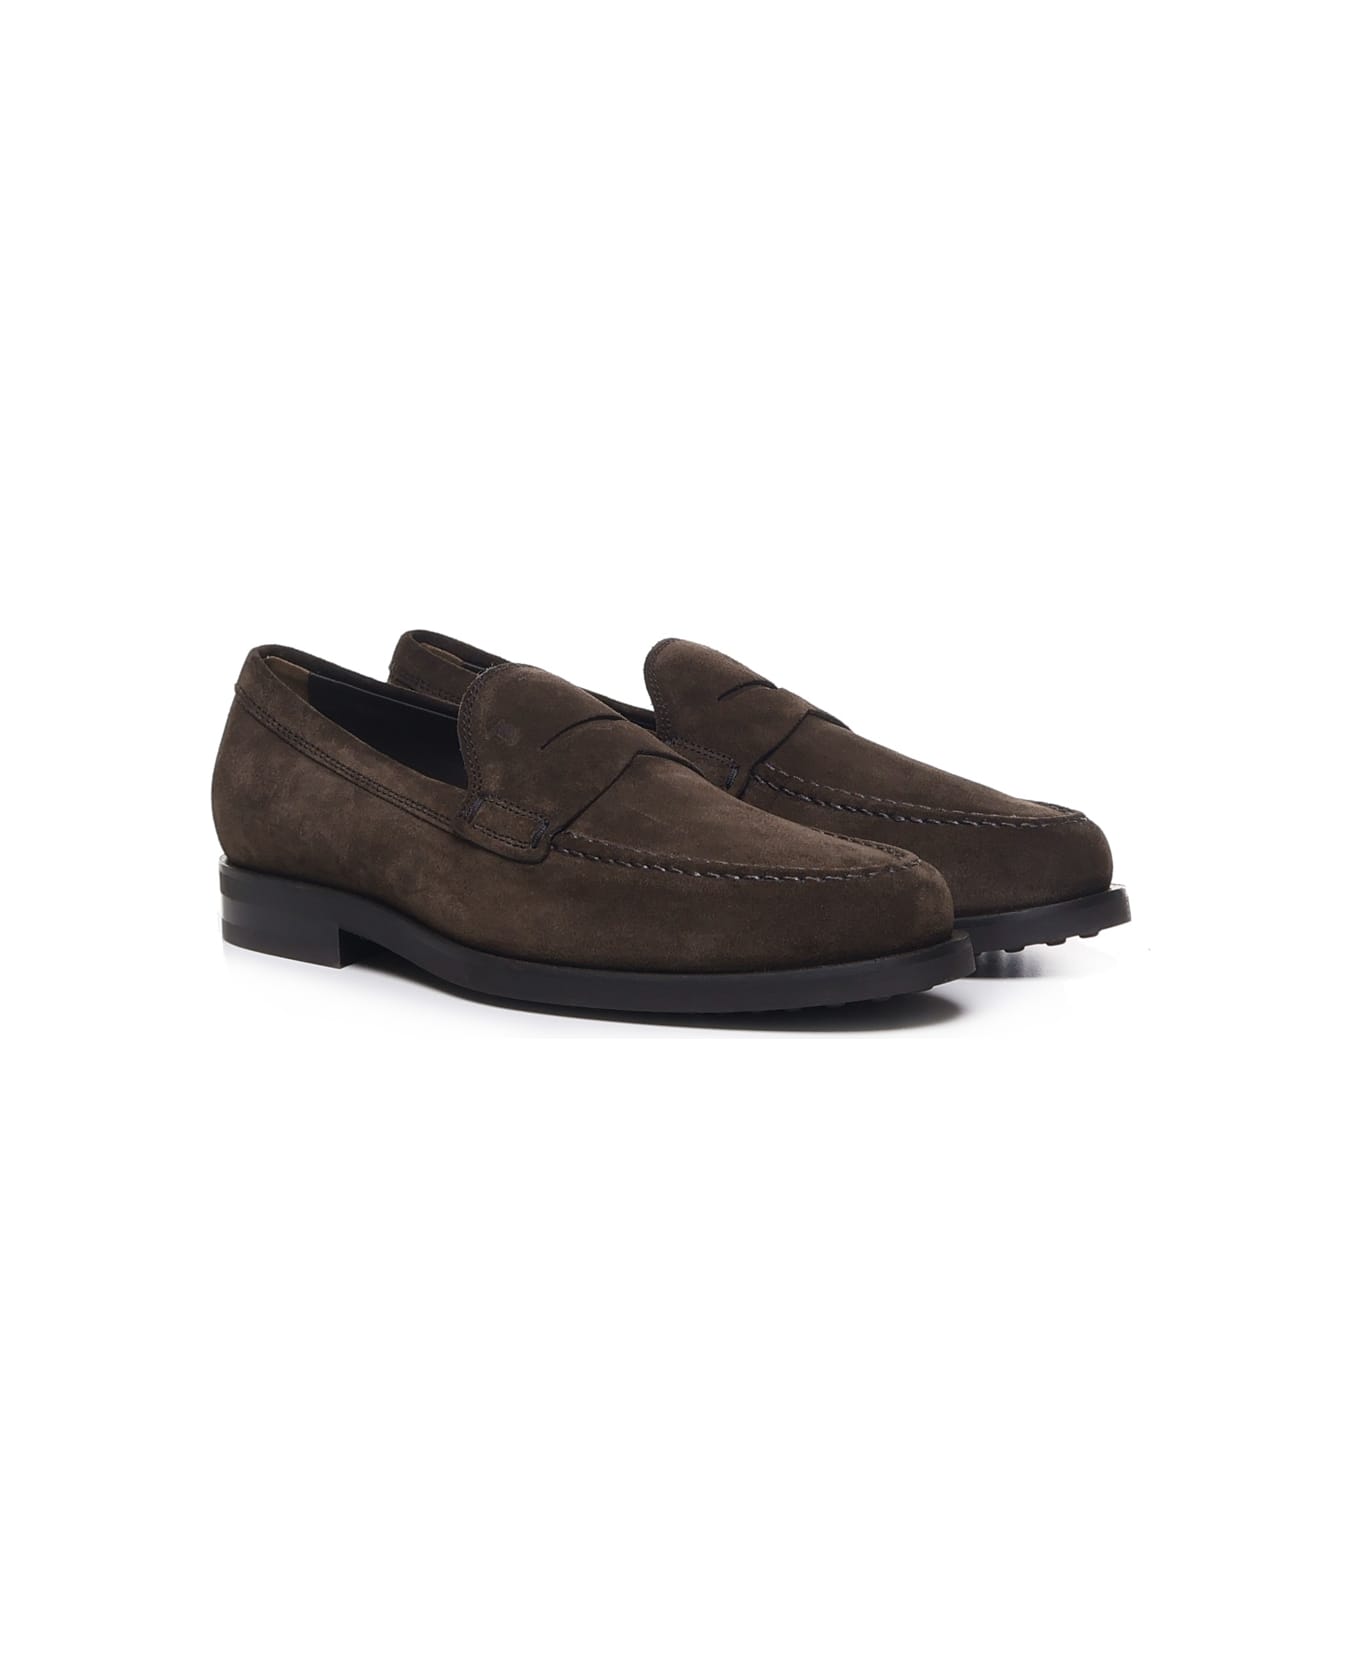 Tod's Brown Suede Loafers - DARK BROWN ローファー＆デッキシューズ